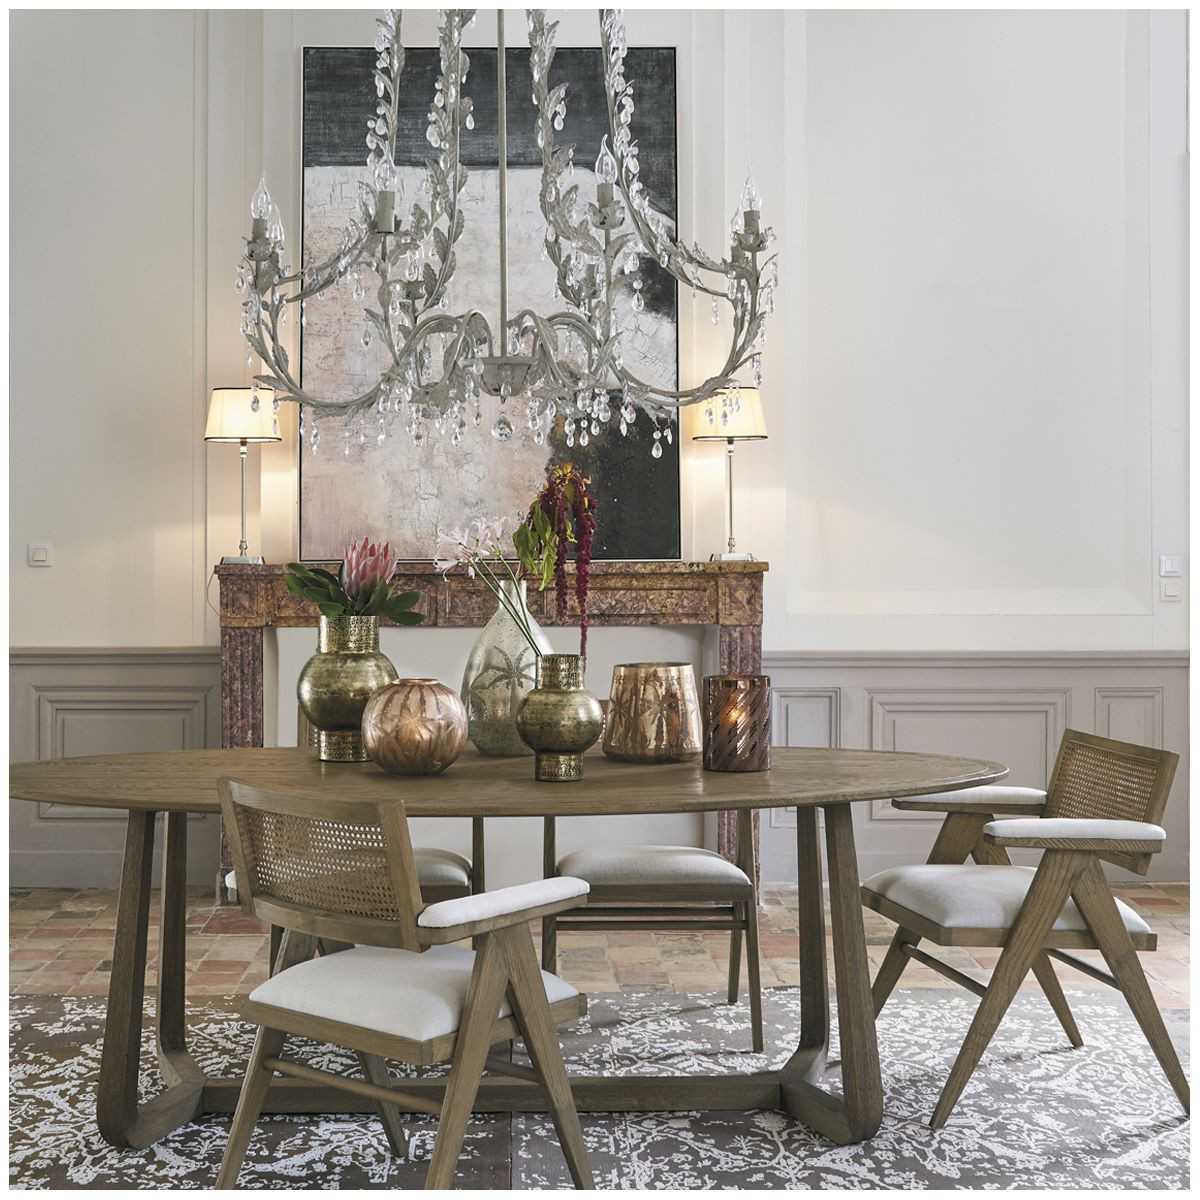 Category DINING ROOM - Bougie personnalisée : Buffet GABRIELLE , Commode GABRIELLE , Carlotta chest of drawers , Table EMILIE...